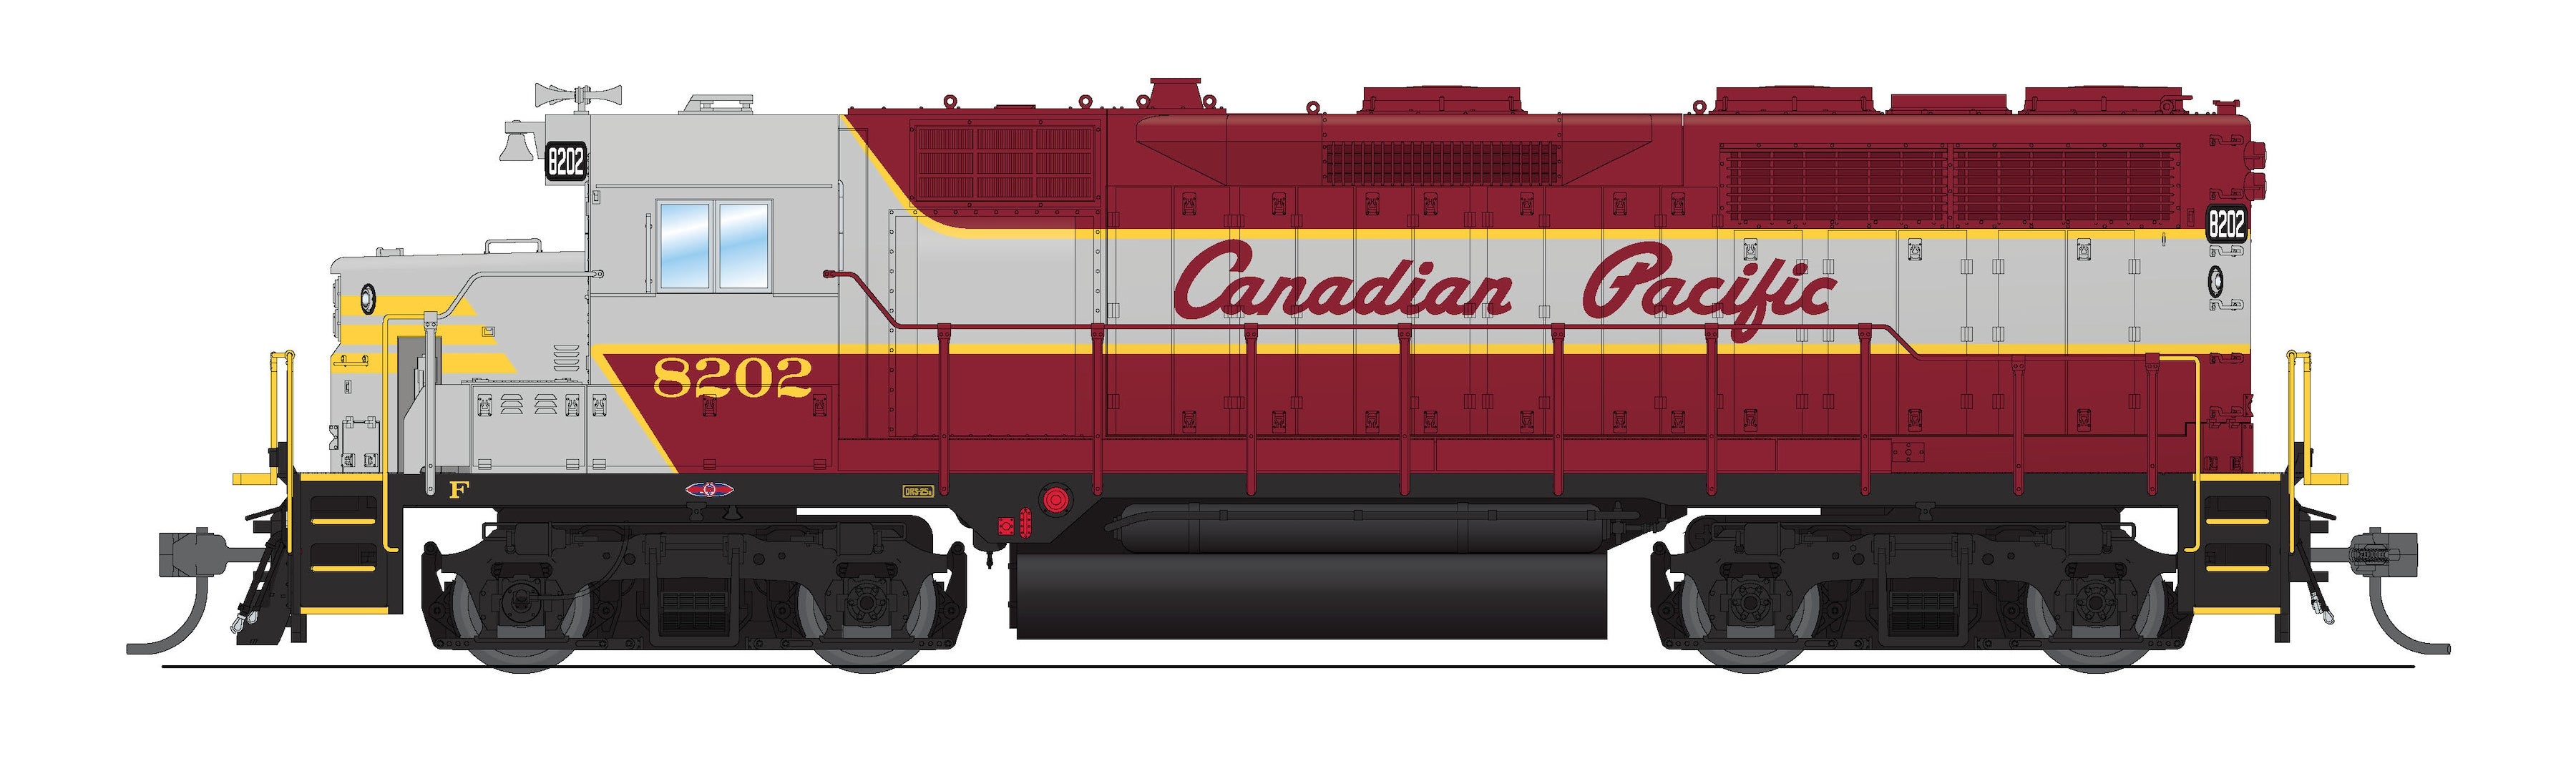 8889 EMD GP35, CP 8202, Maroon & Gray w/ Early Roadnumber, Paragon4 Sound/DC/DCC, HO